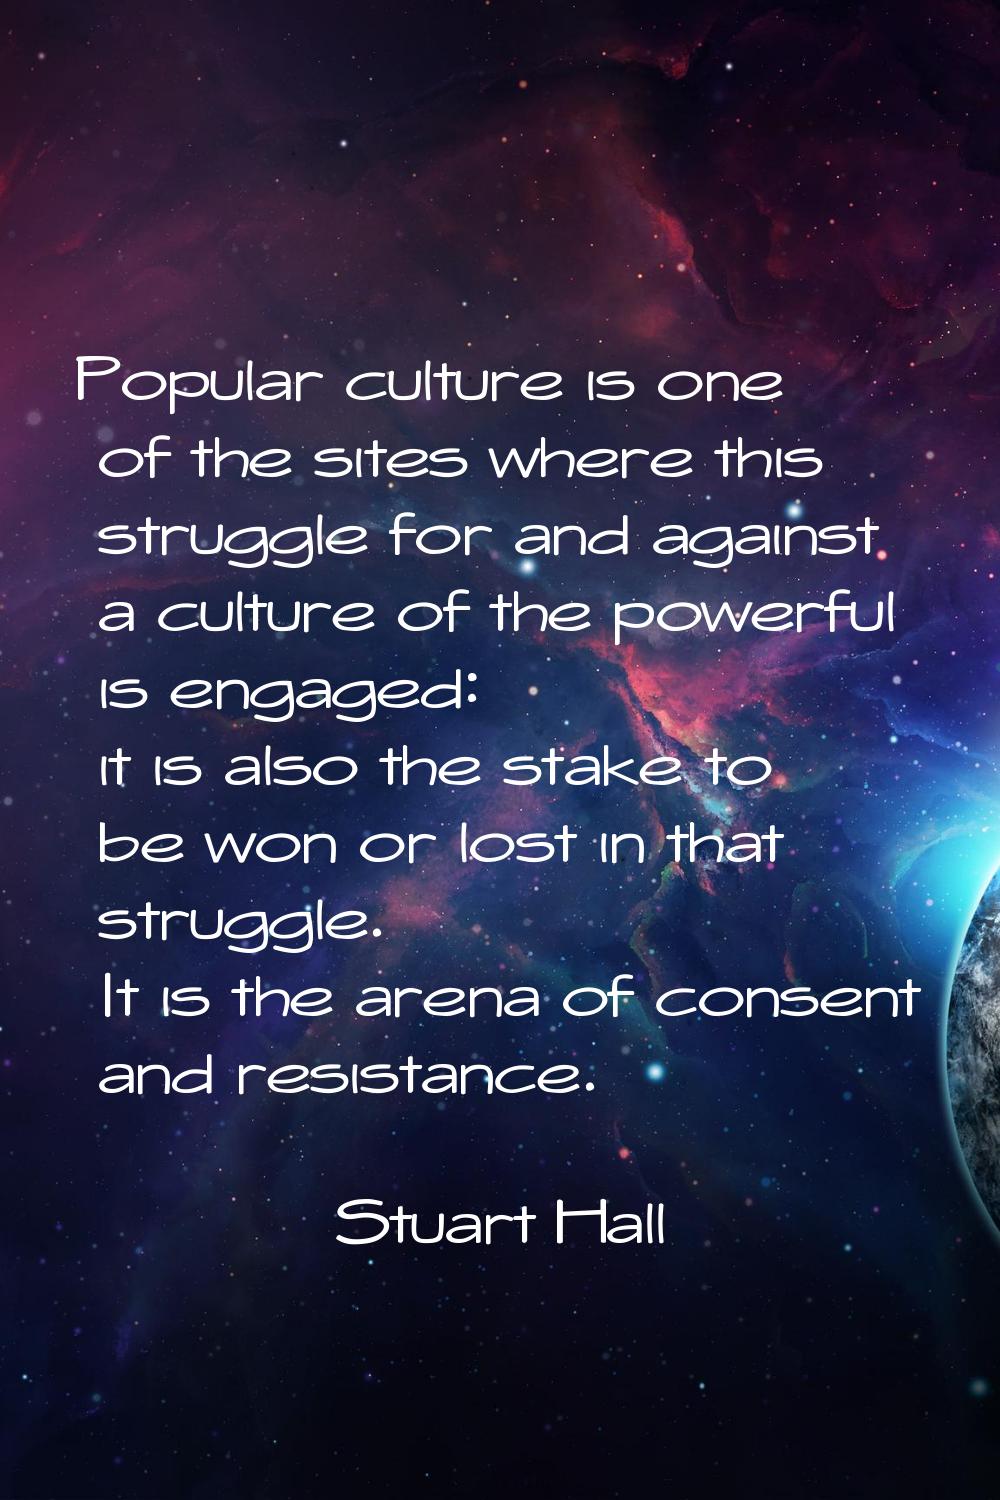 Popular culture is one of the sites where this struggle for and against a culture of the powerful i